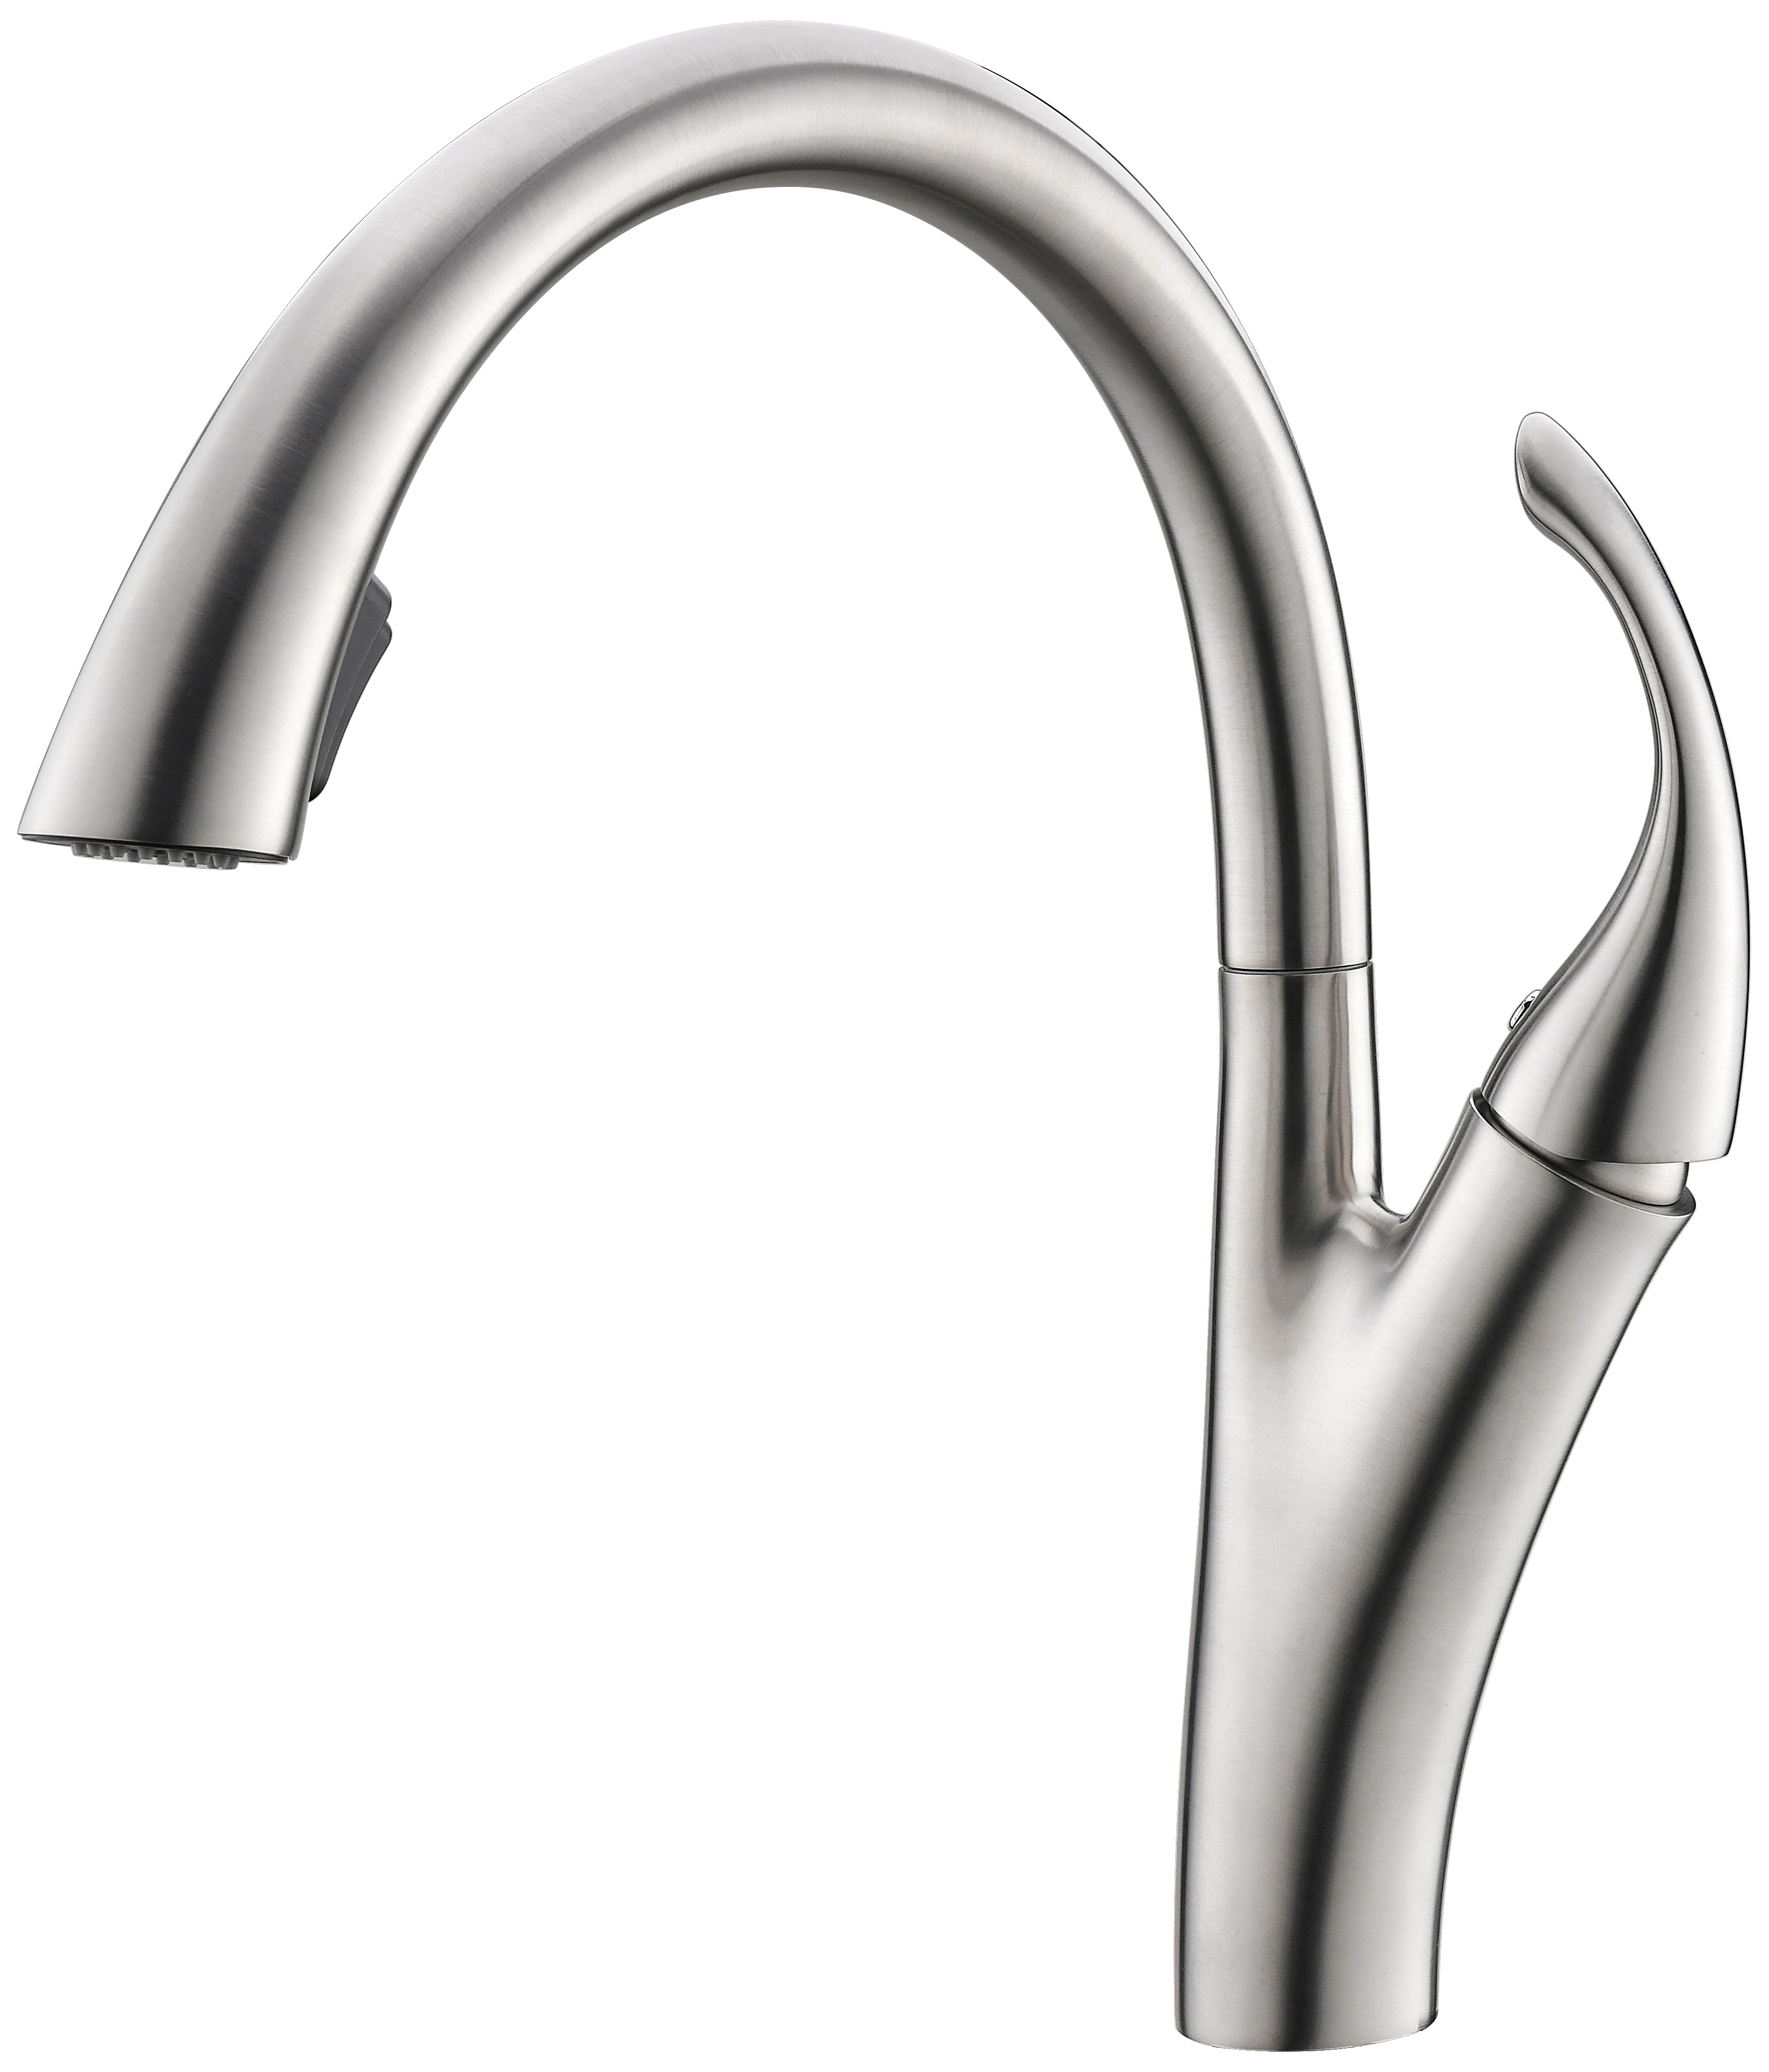 Brand New High Quality Water Faucet Motion Kitchen Tap With Cupc Certificate